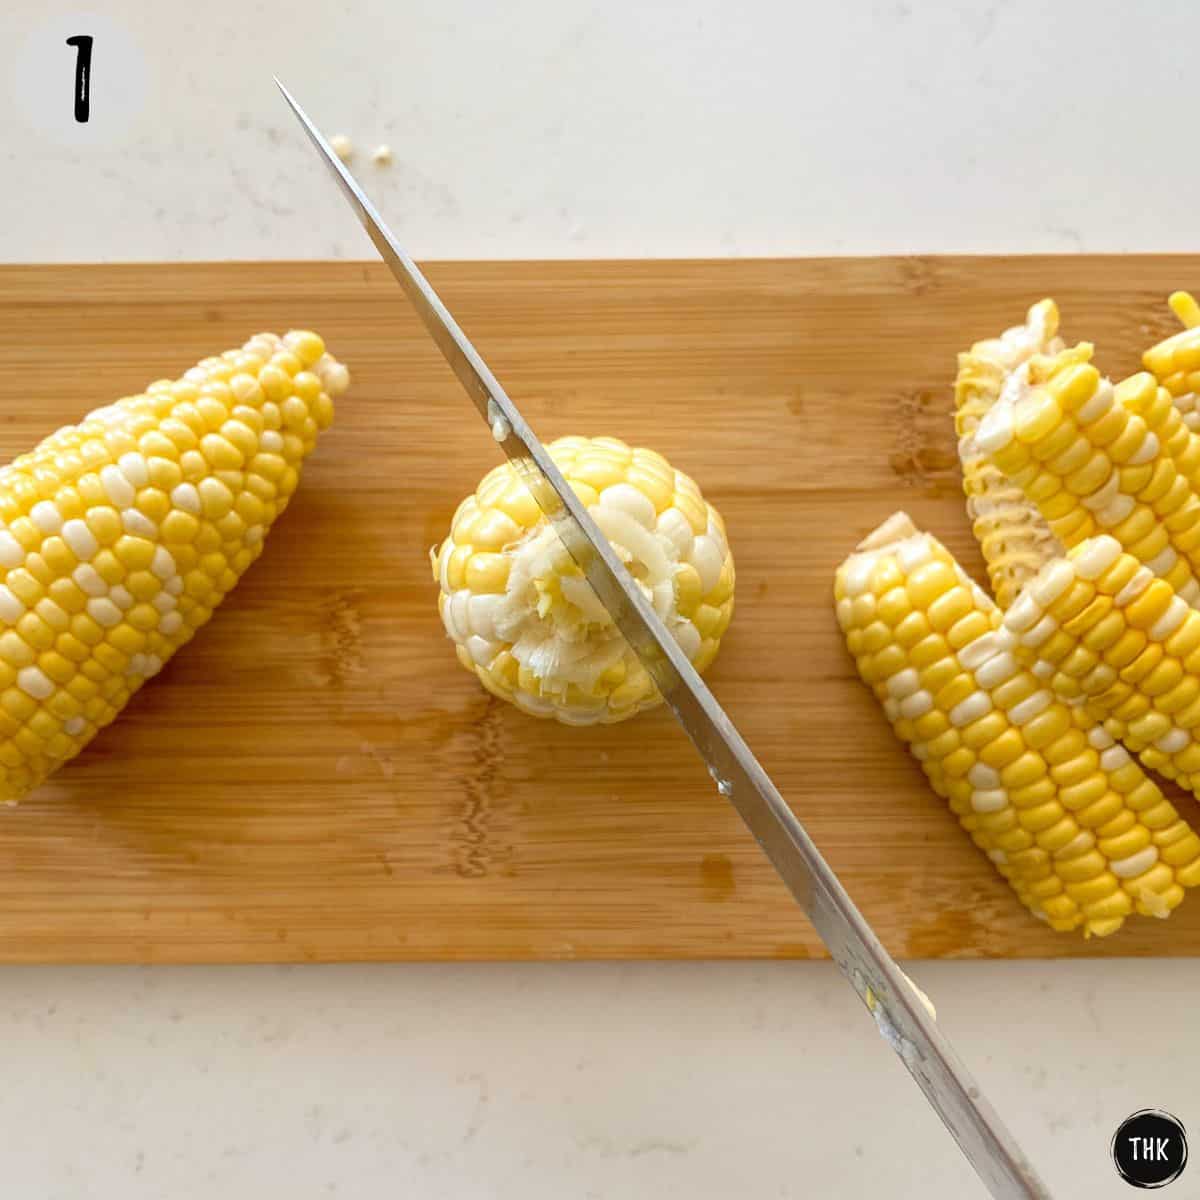 Halved corn sitting upright on cutting board with sharp knife about to cut it.